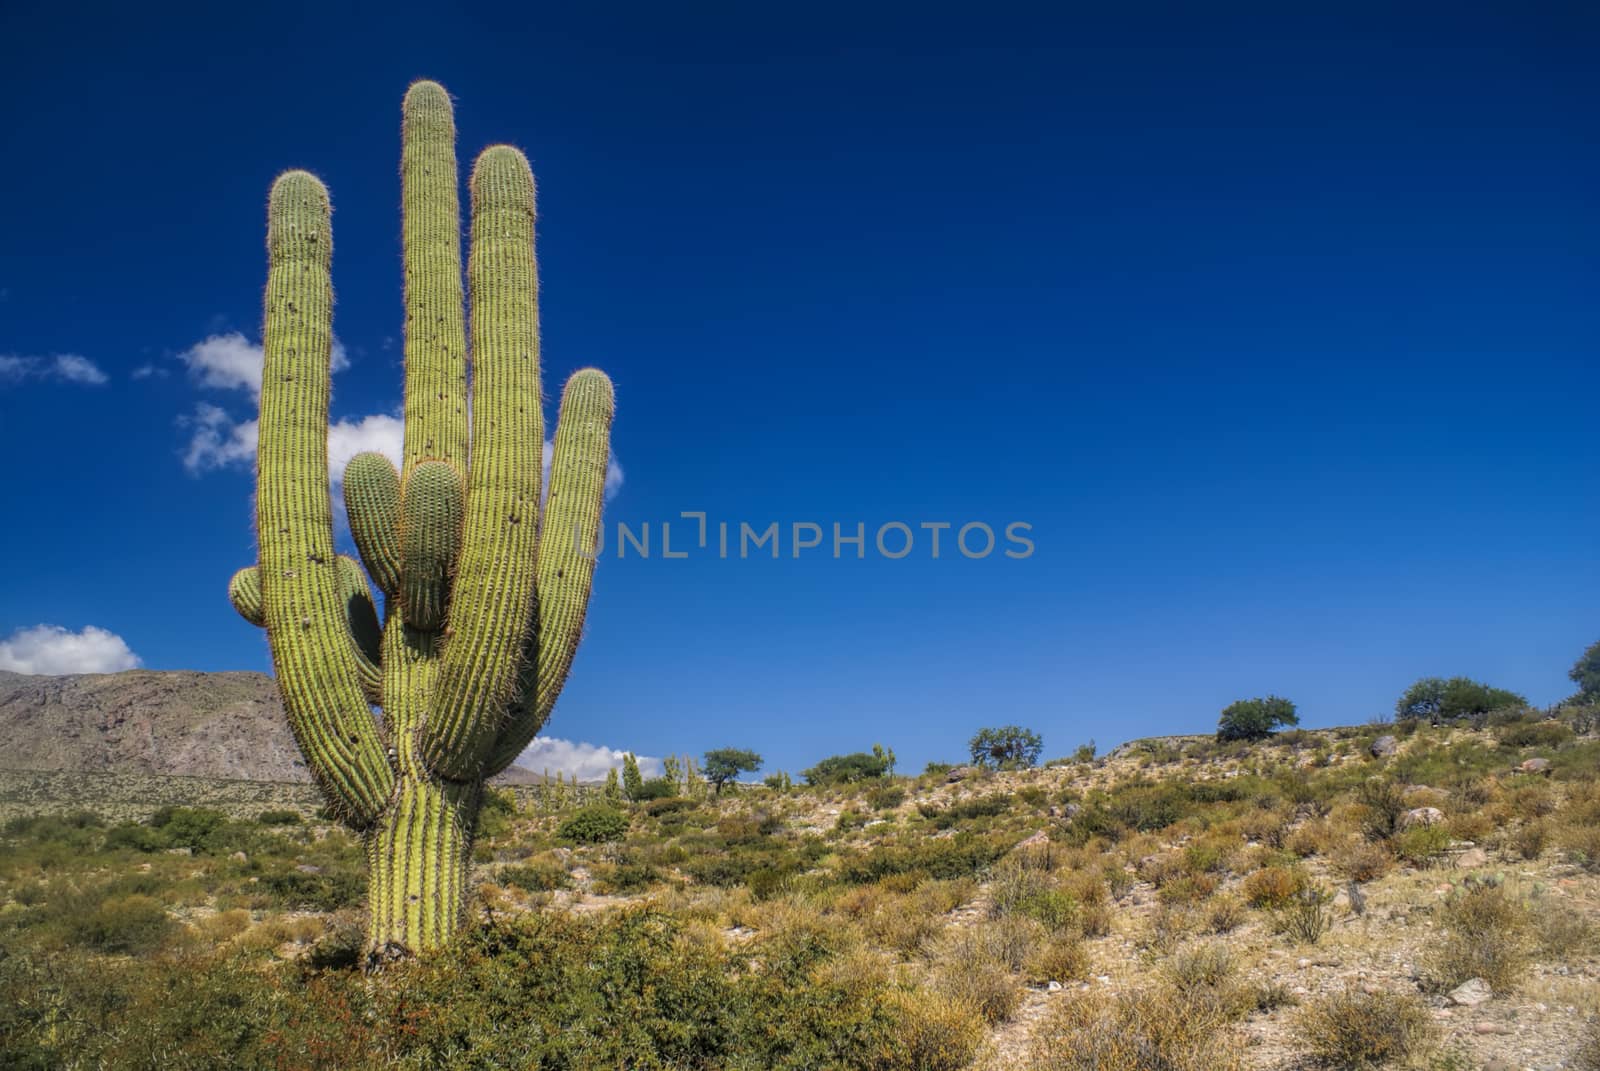 Large cactus dominating landscape in Argentina, South America      